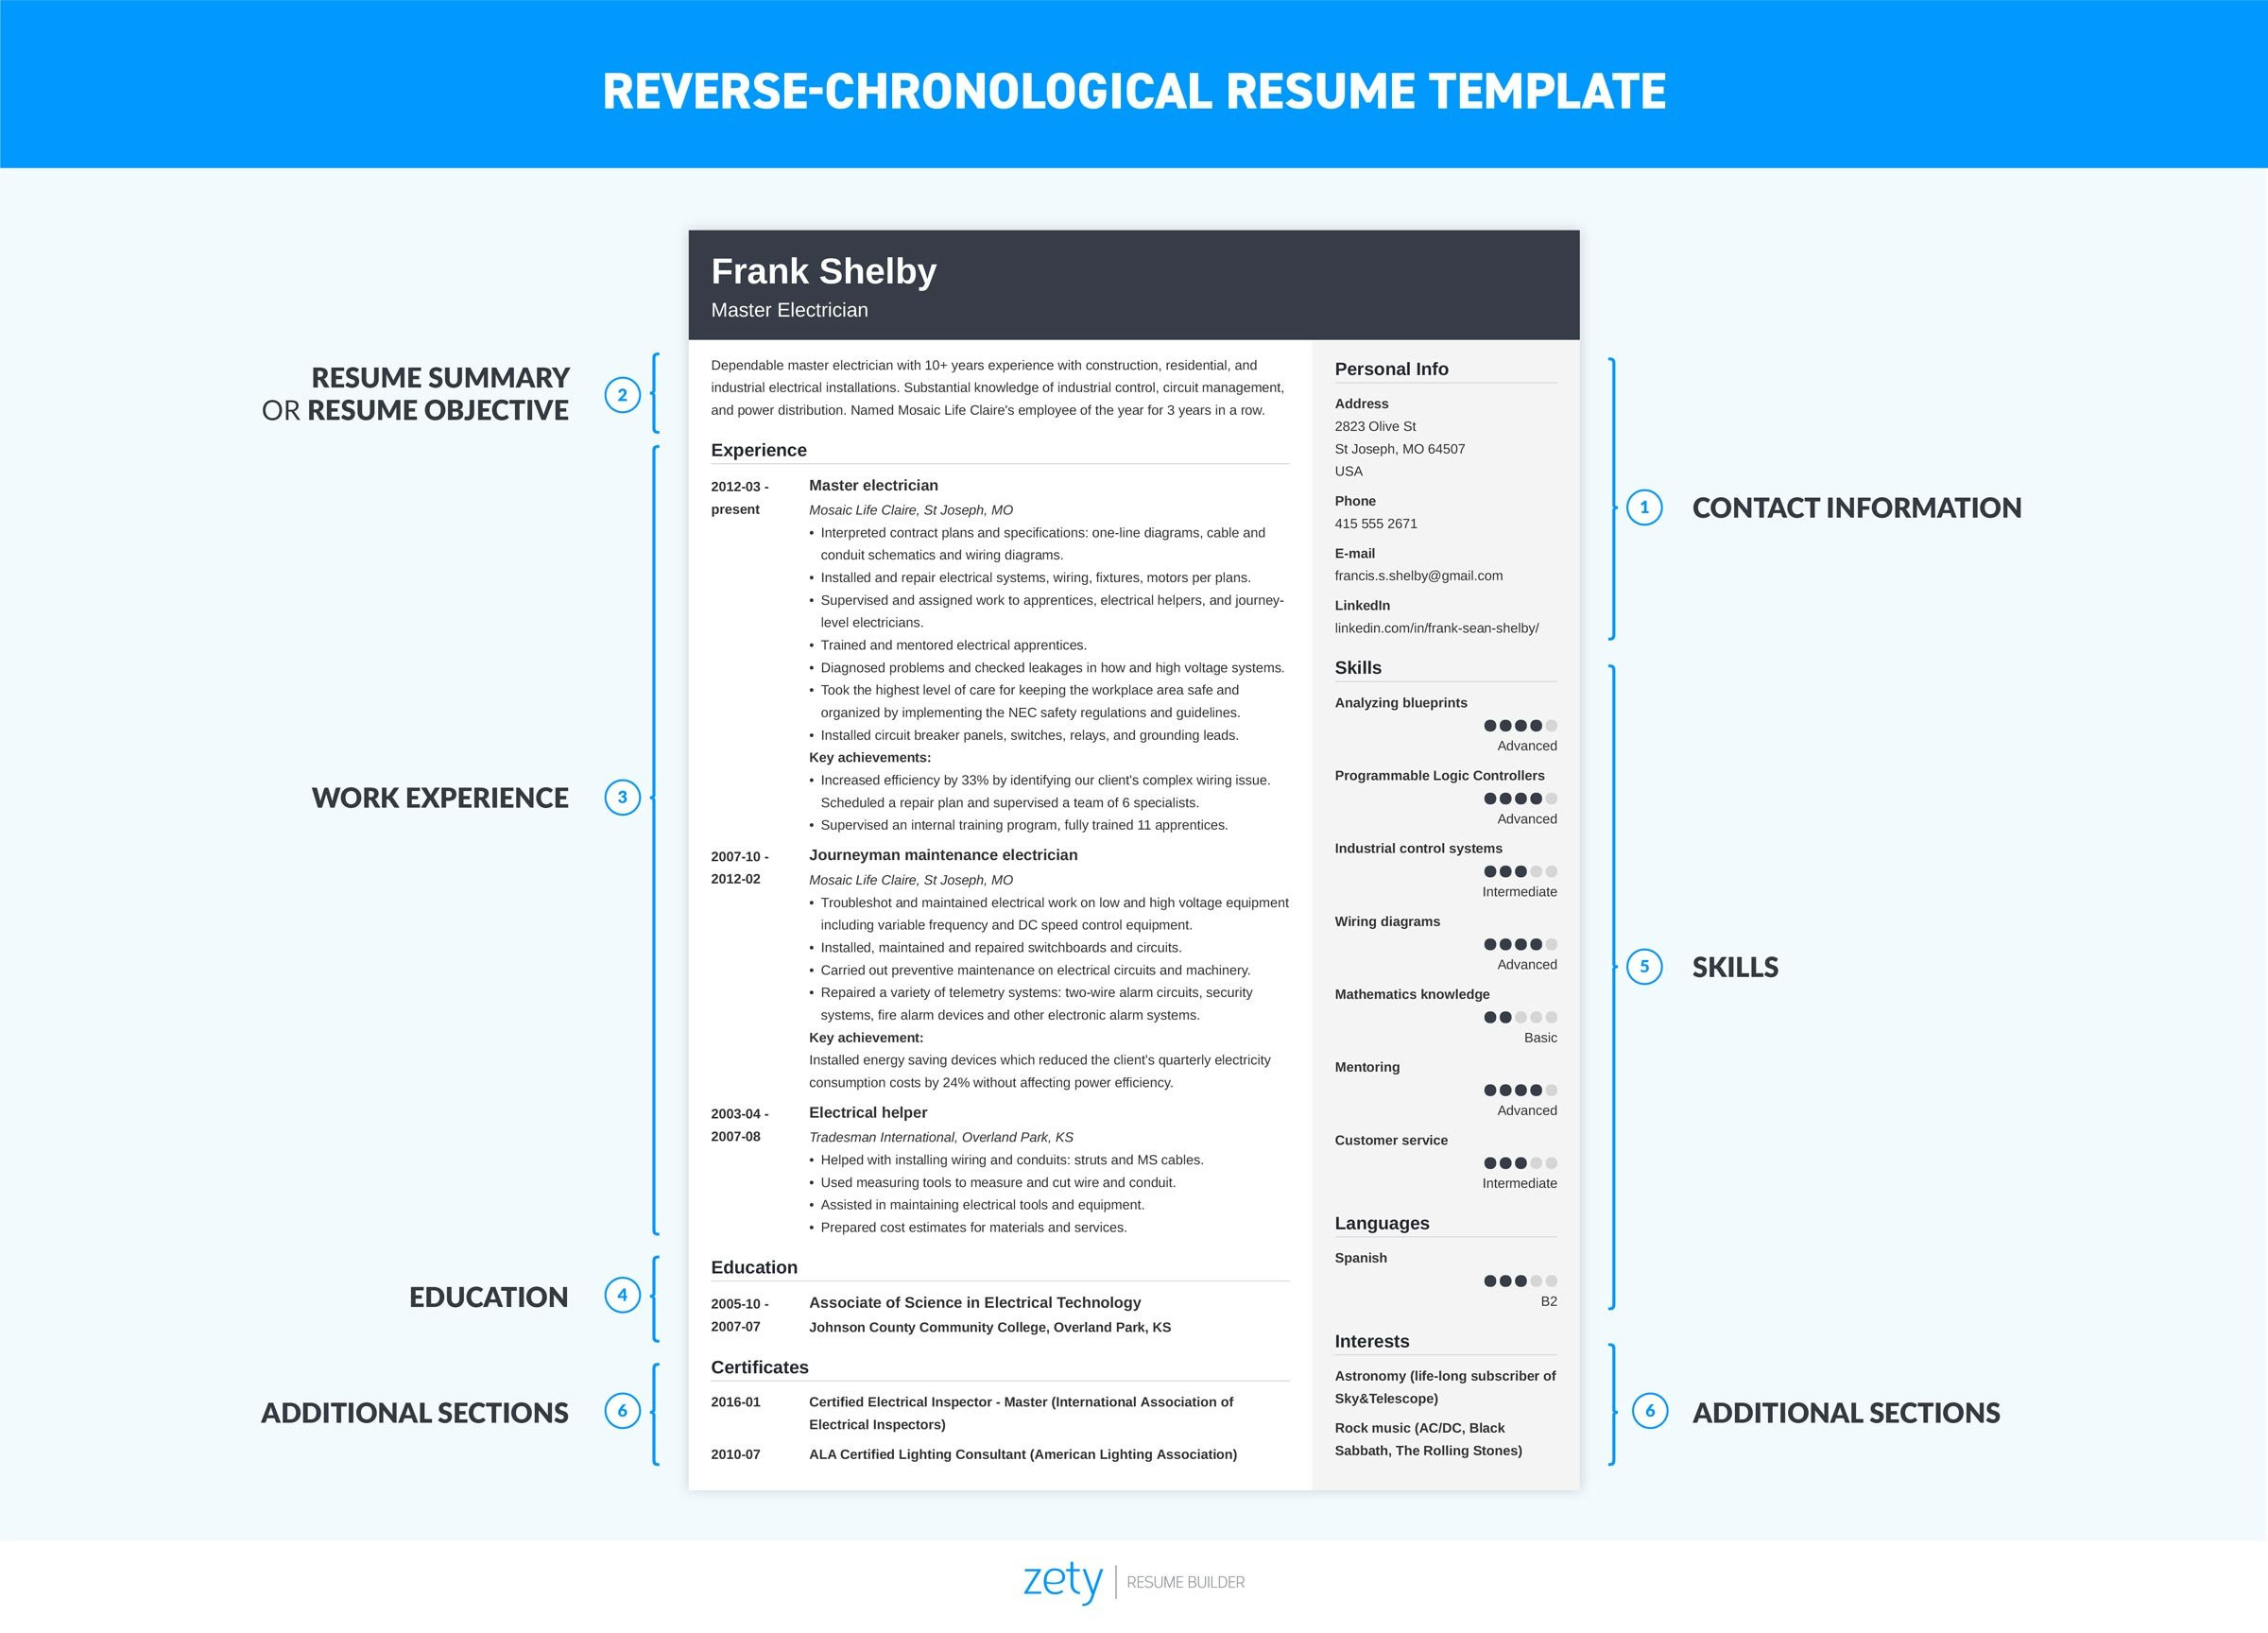 Smeal College Of Business Resume Template Reverse Chronological Resume Templates & format Examples